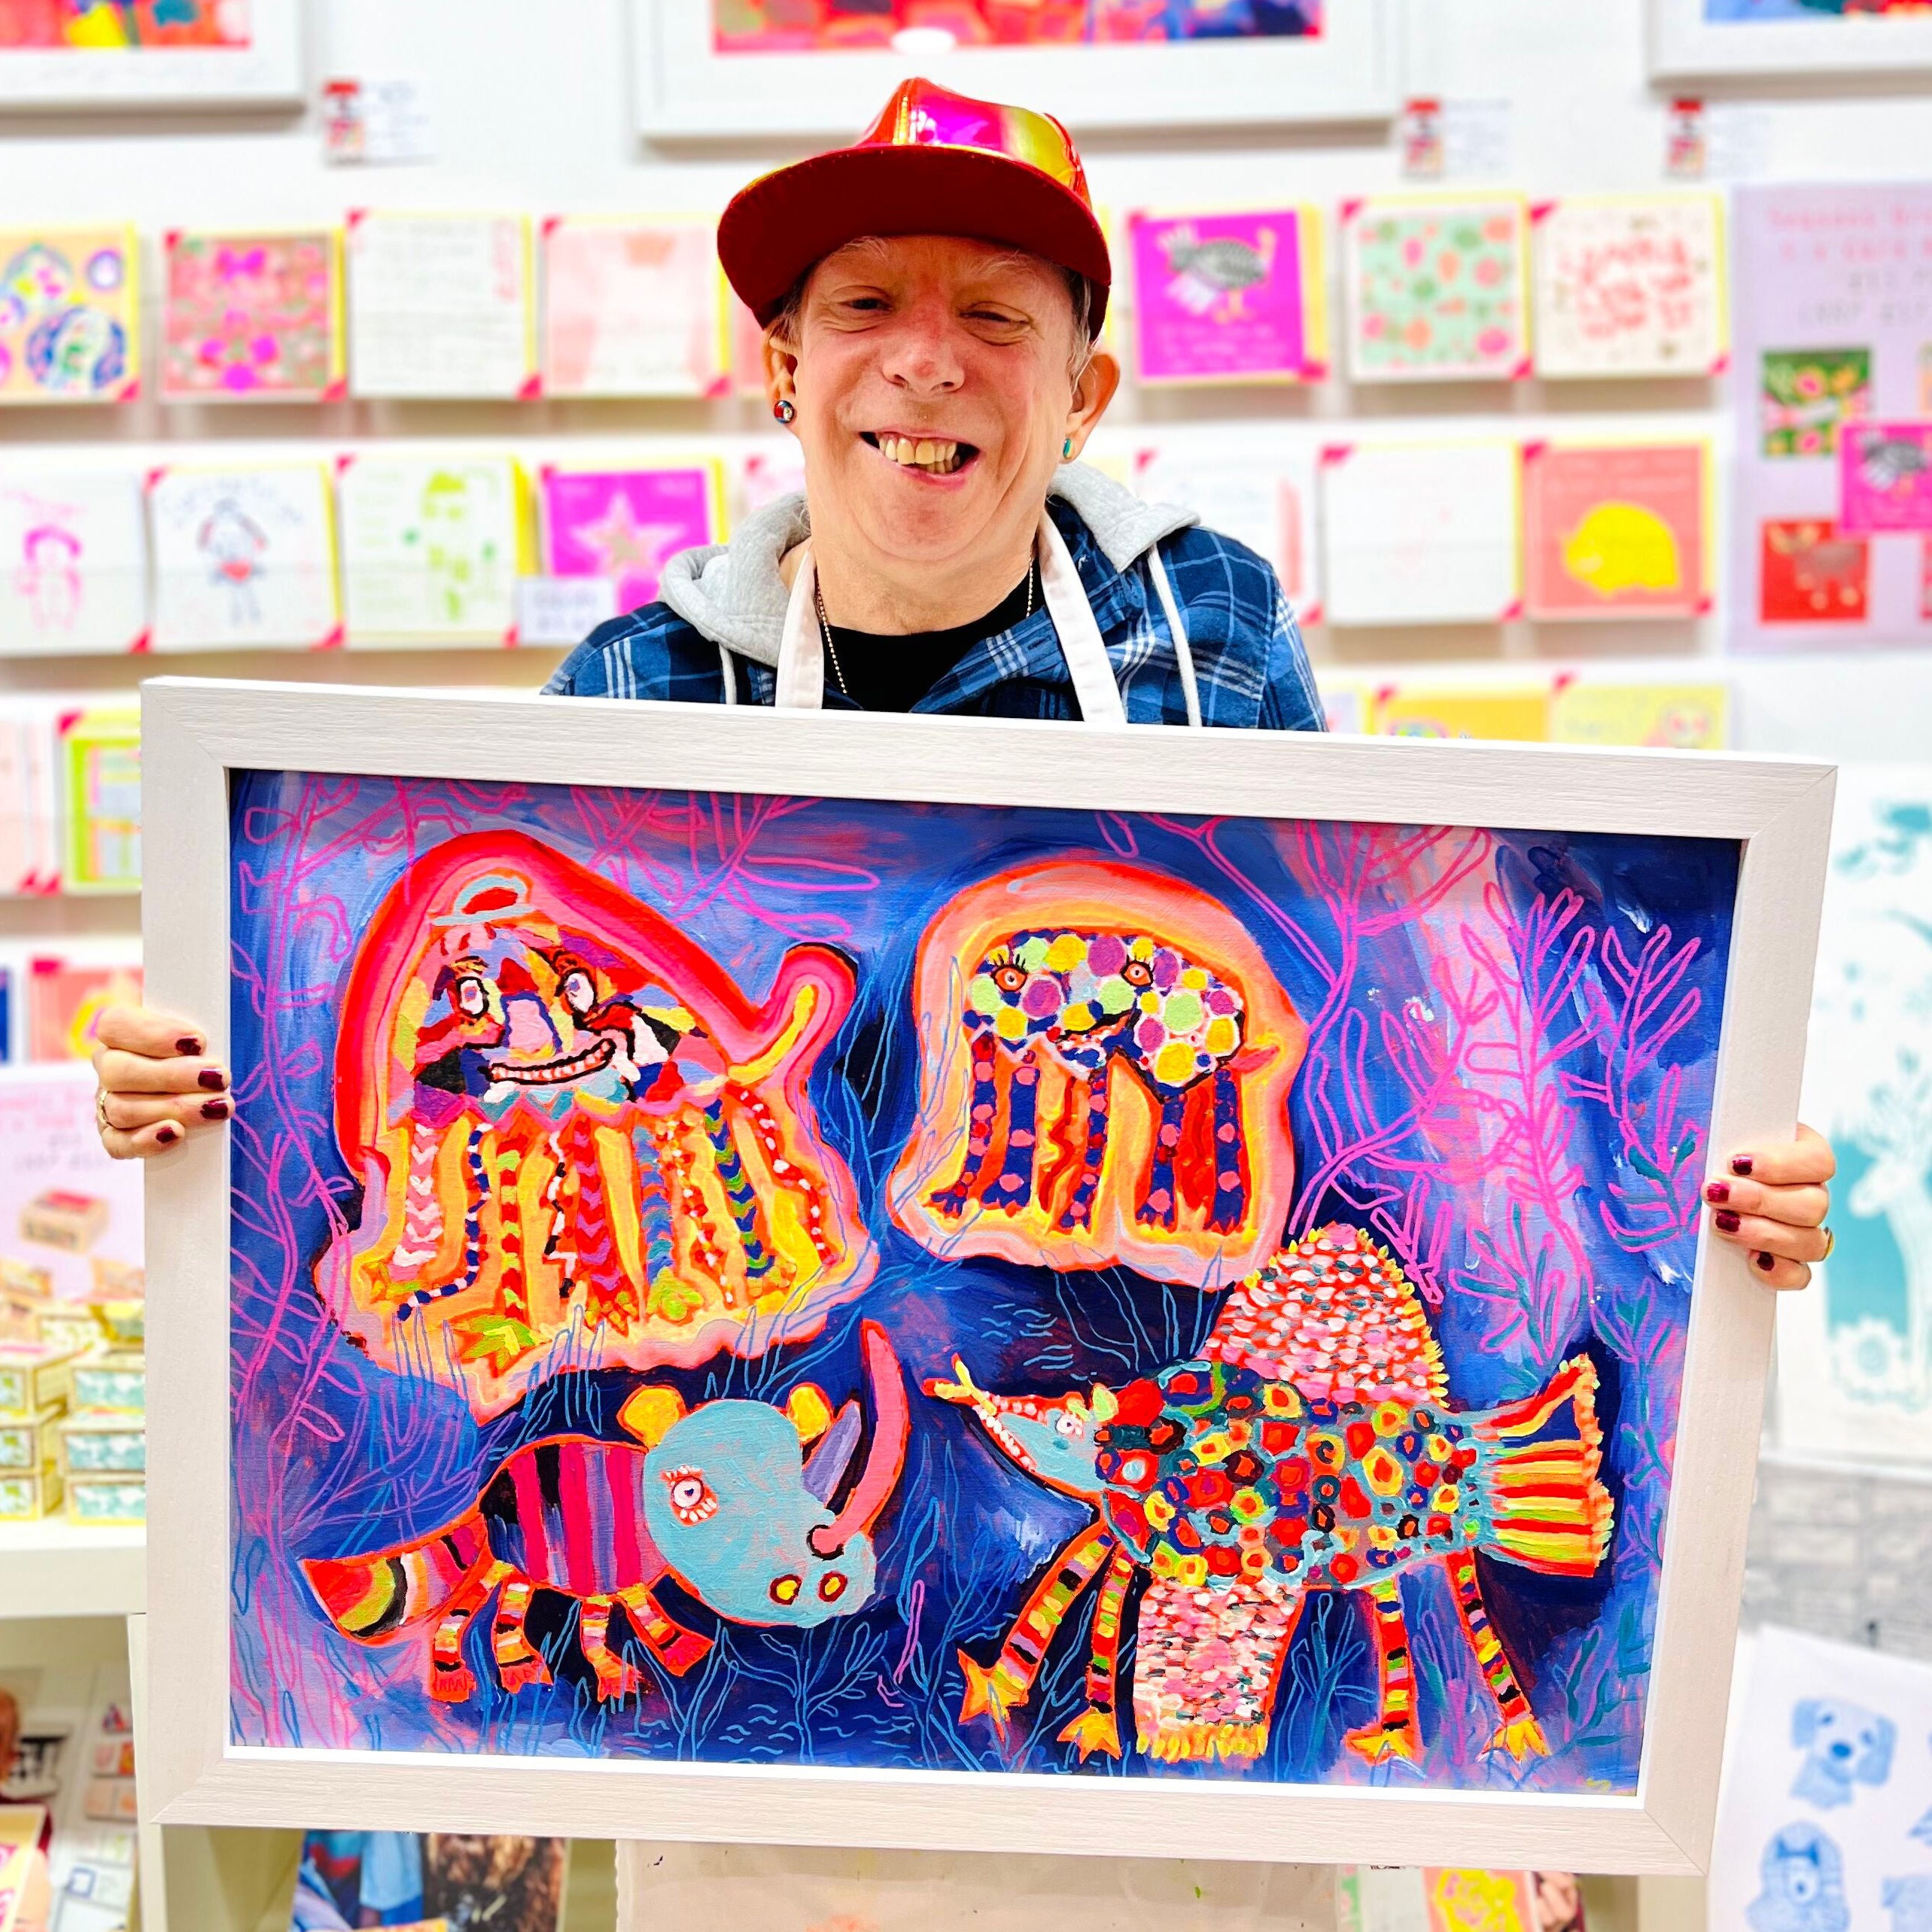 Male artist holding Bright coloured hand painted strange animal design called Jelly Hippo Crock-a-doo